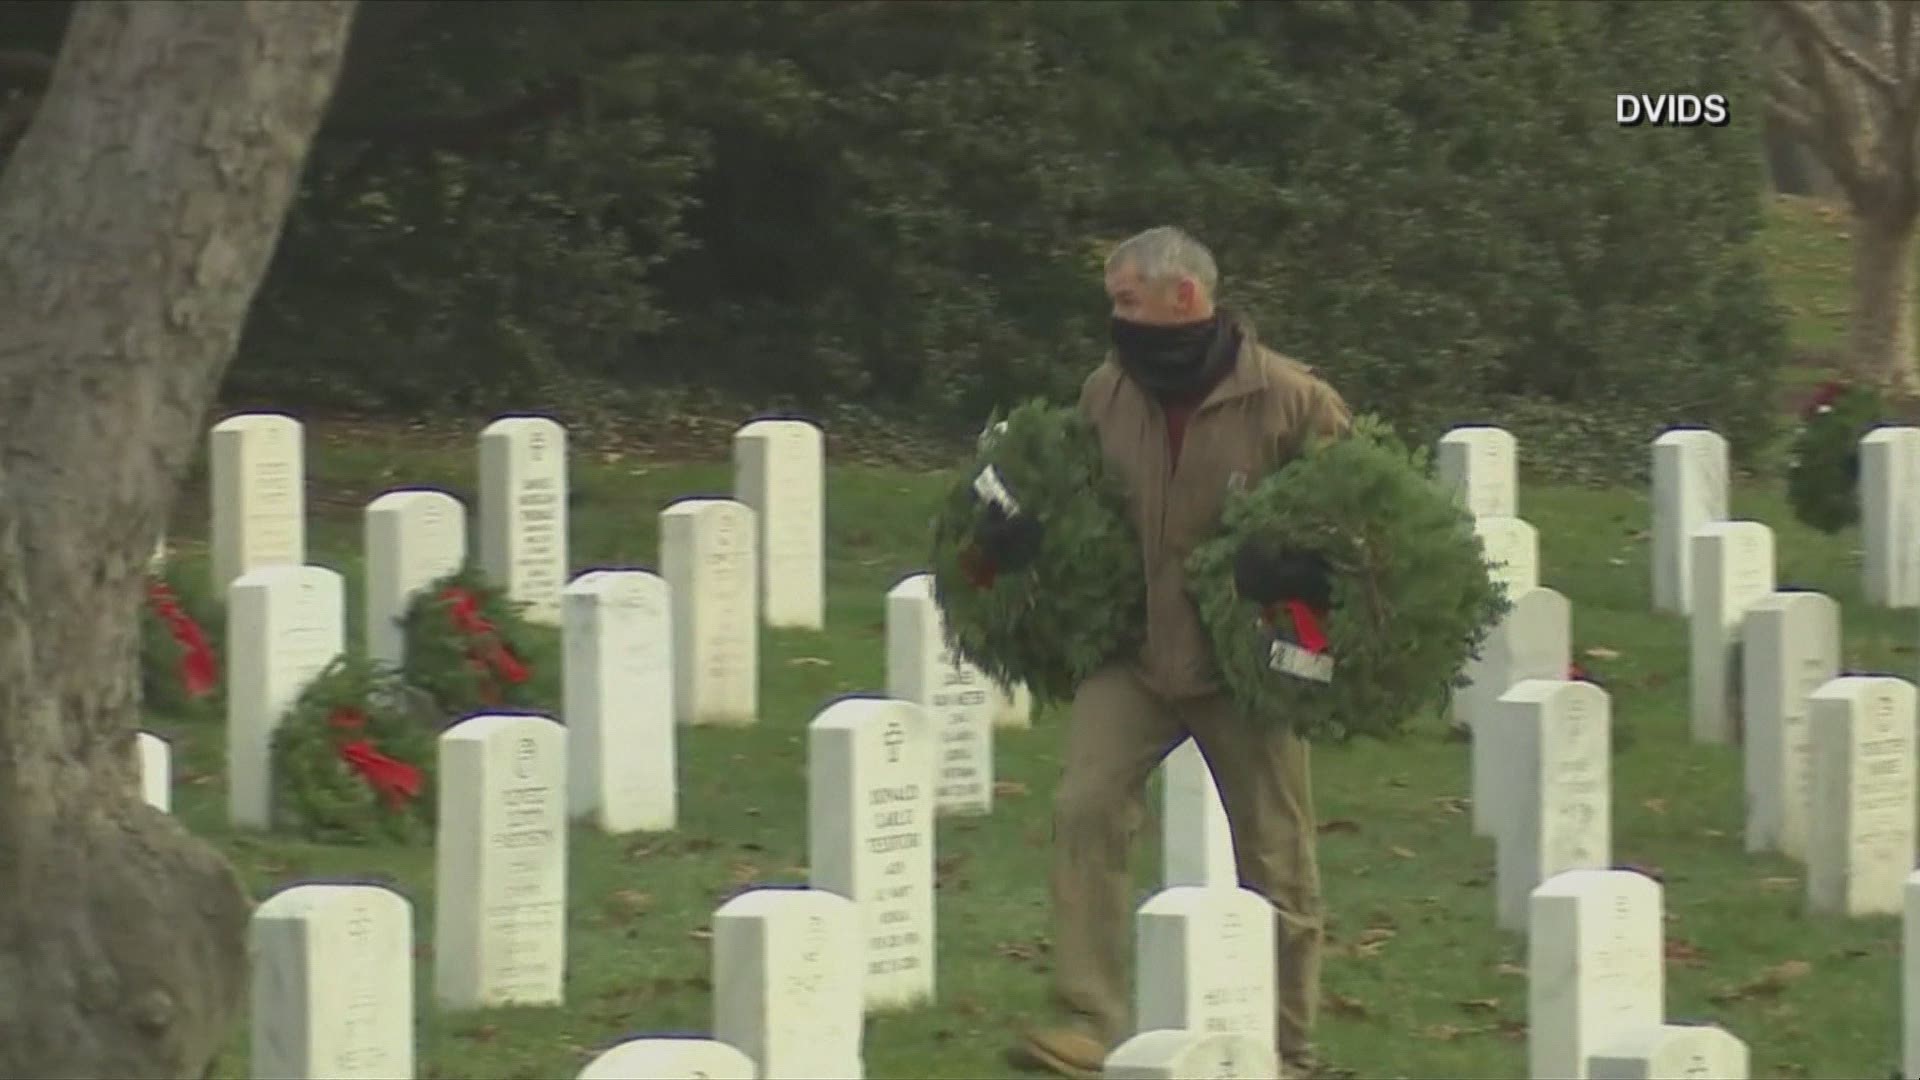 The 2020 Wreaths Across America arrived at Arlington National Cemetery on Saturday morning where volunteers placed Maine wreaths on graves of those lost in military